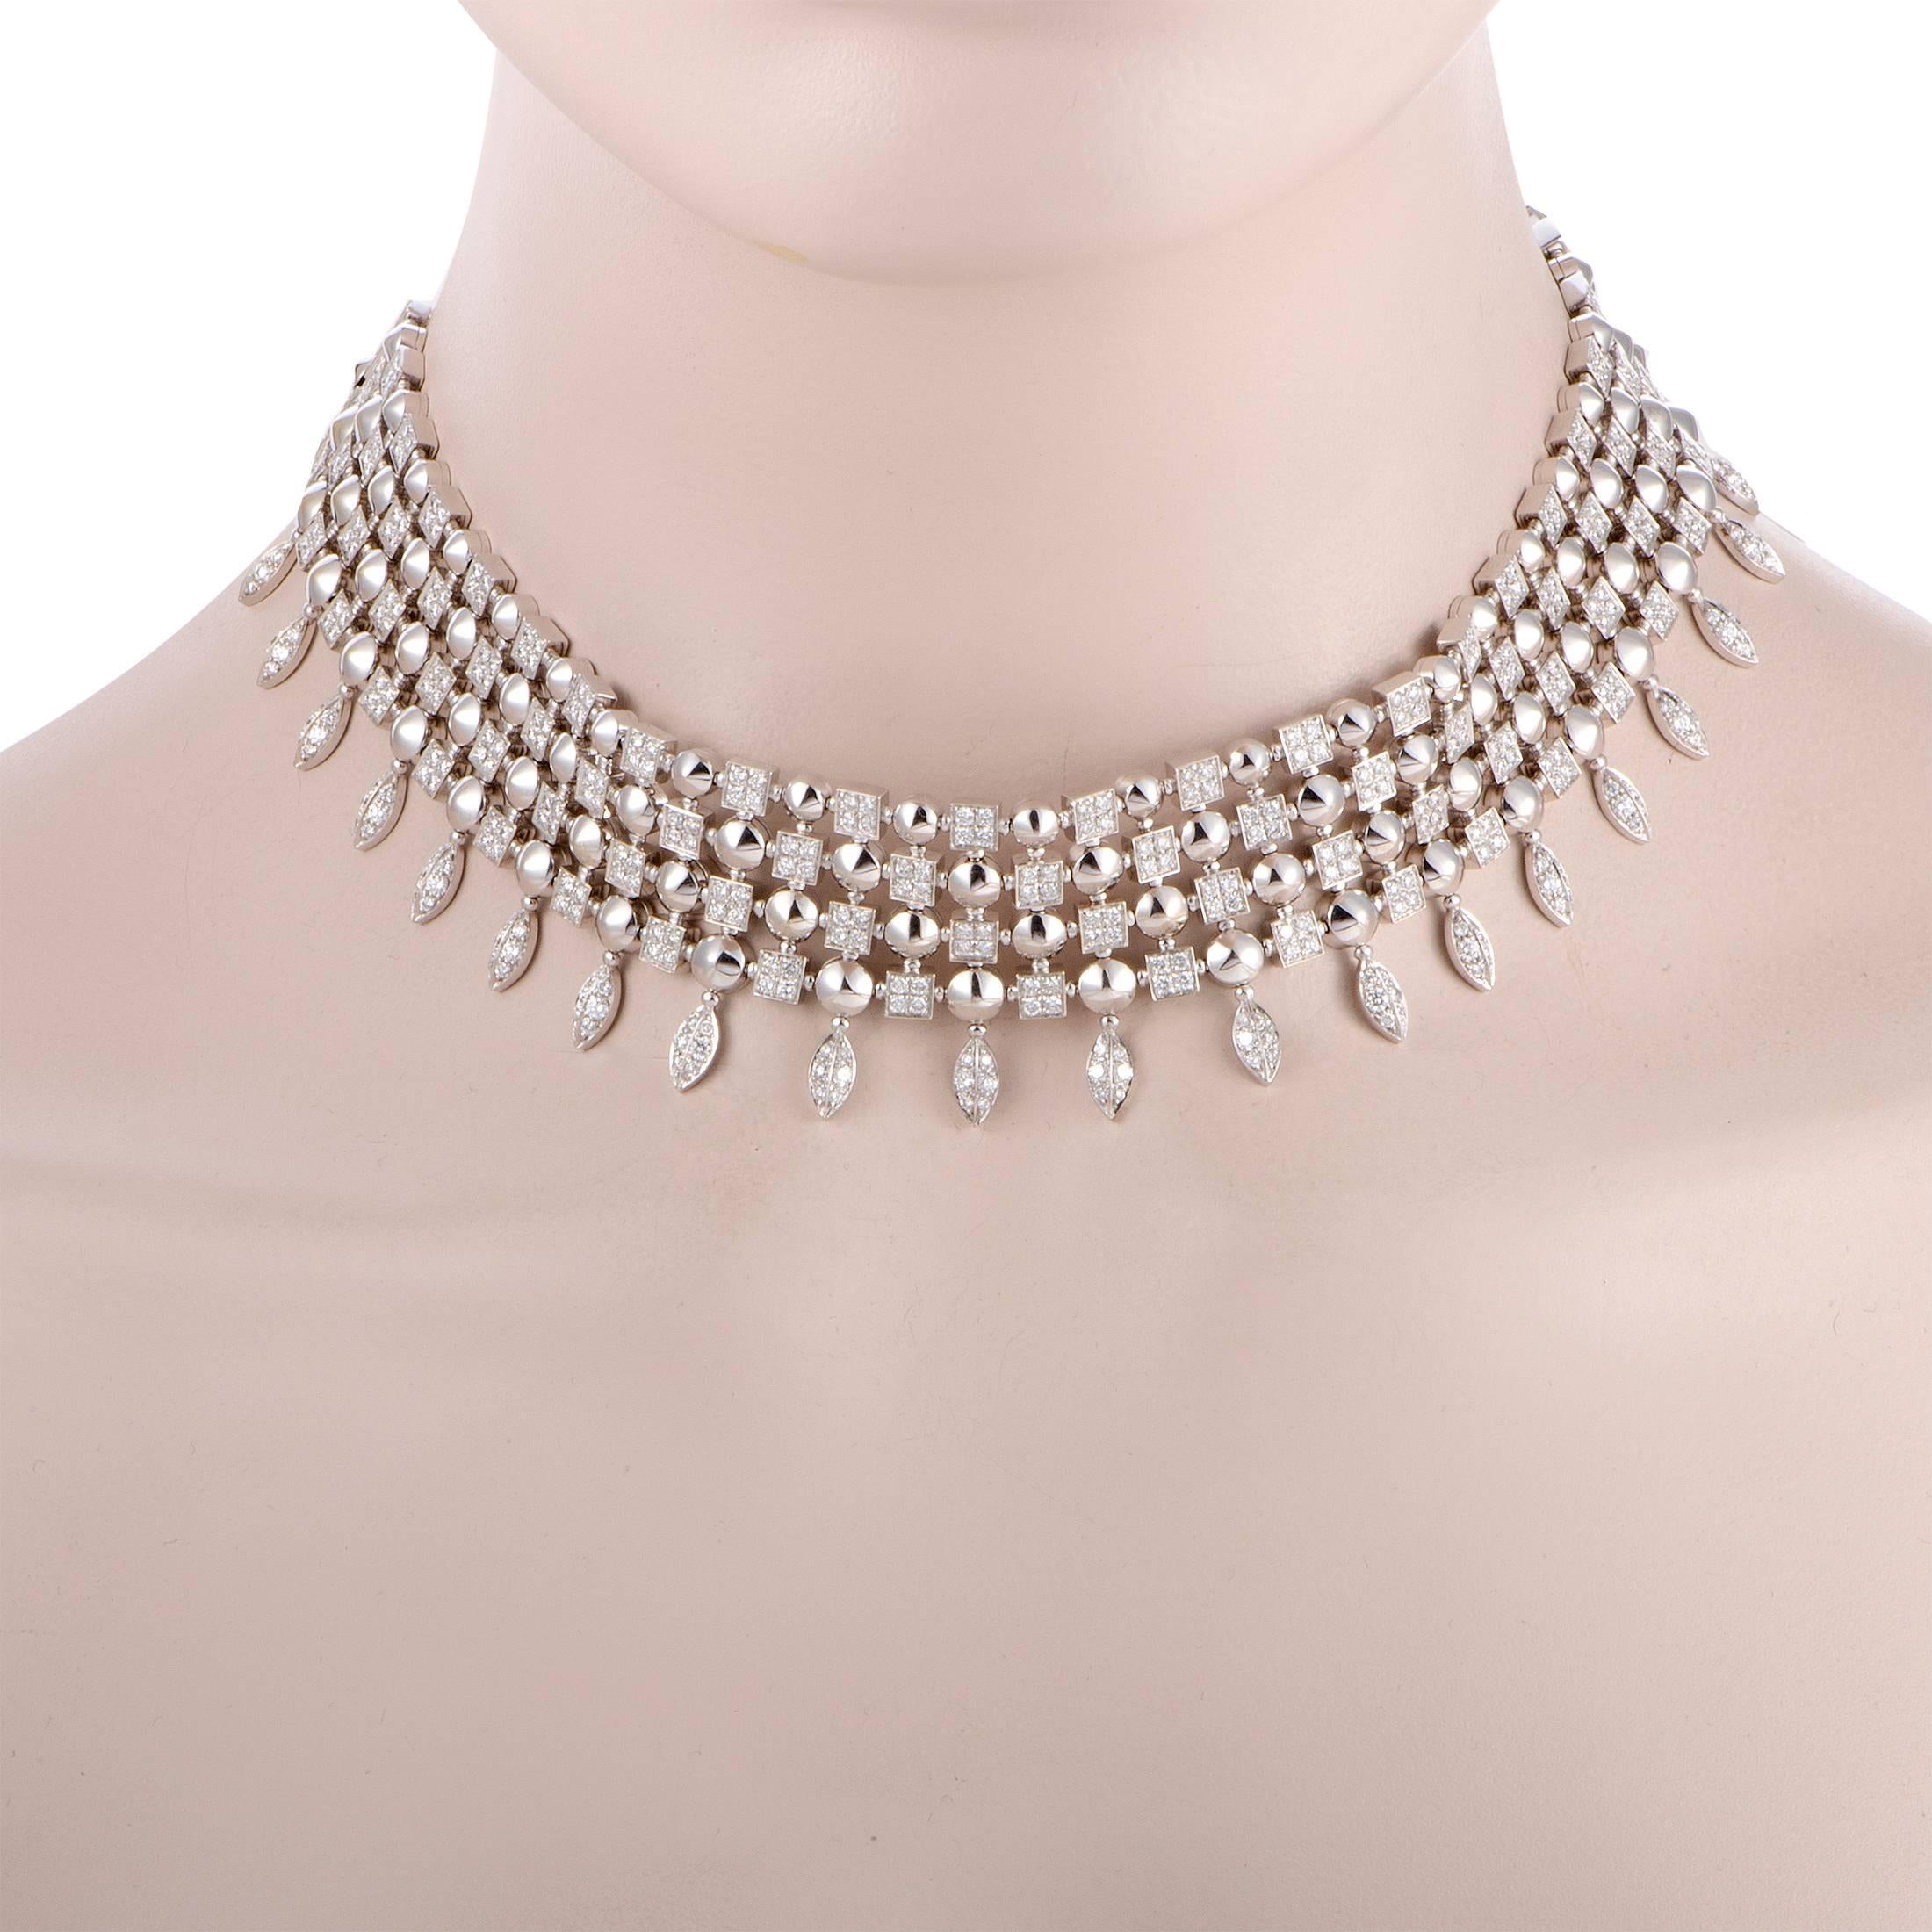 Presented within the fascinating “Lucea” collection by Bvlgari, this stunning necklace boasts exceptionally stylish design and ravishing diamond décor. The necklace is made of elegant 18K white gold and weighs 144 grams.
Included Items: